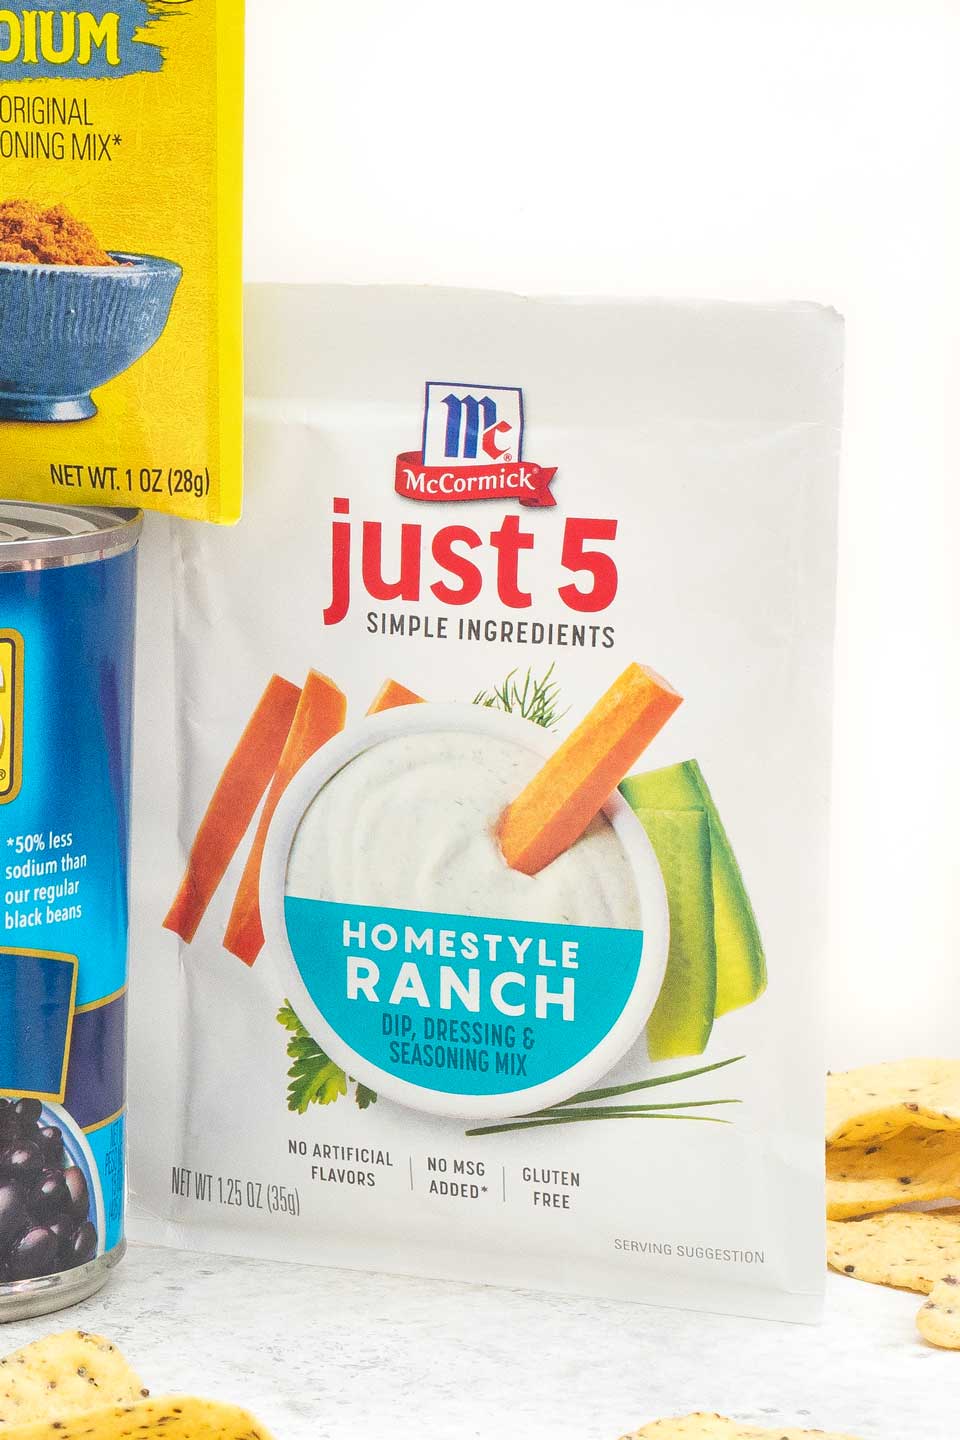 Packet of McCormick Just 5 Homestyle Ranch dressing mix.